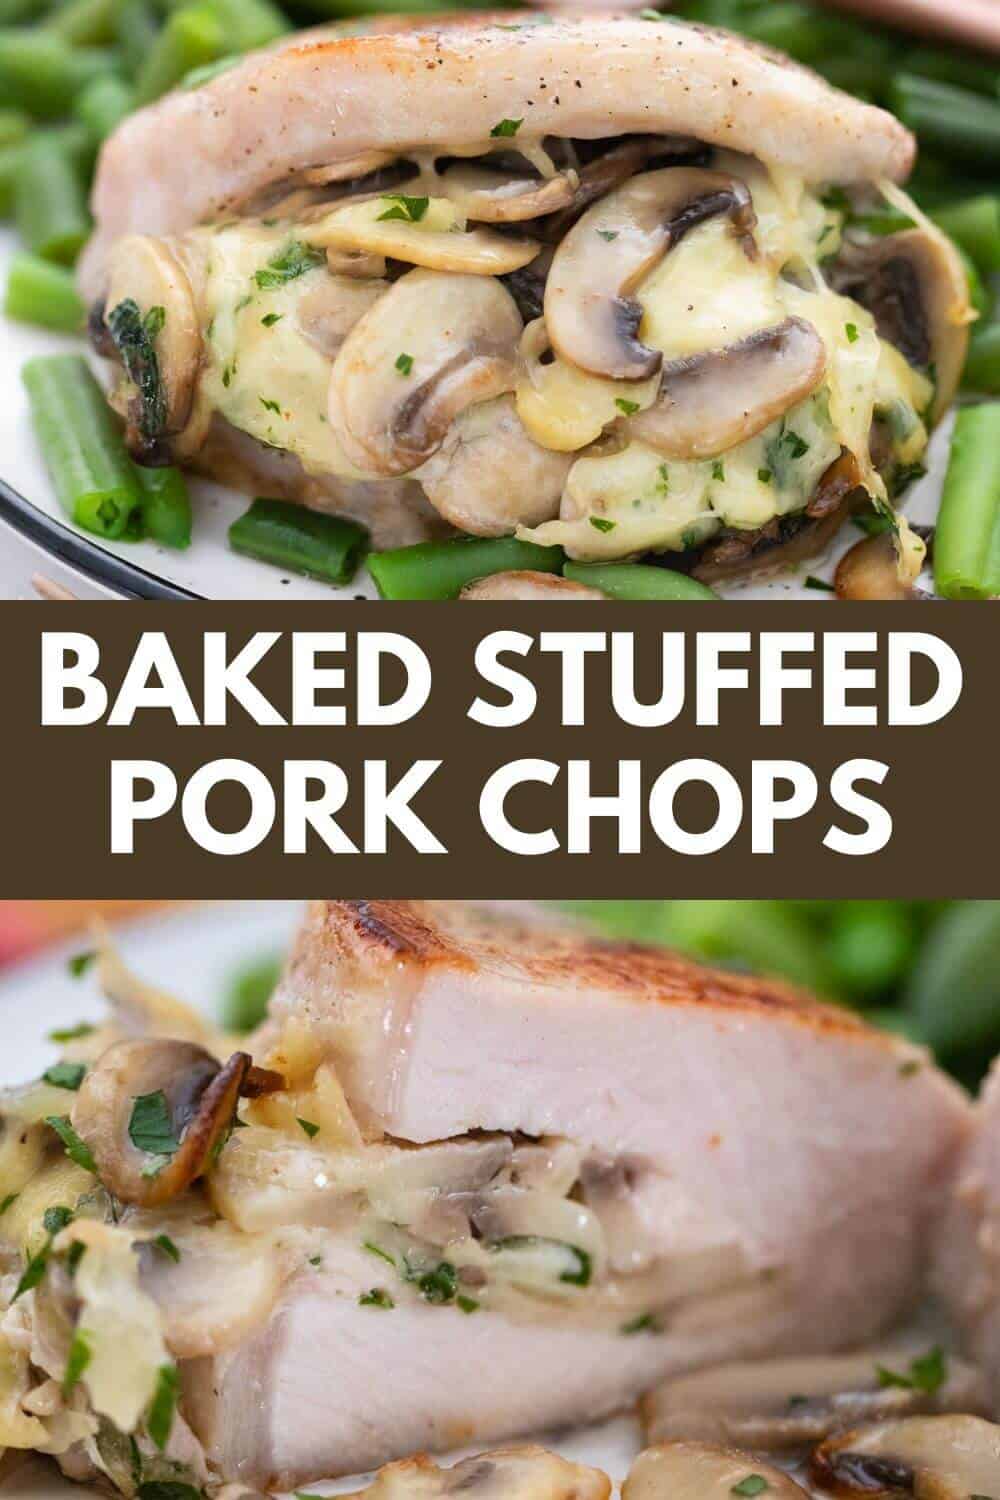 Baked stuffed pork chops with mushrooms and green beans.